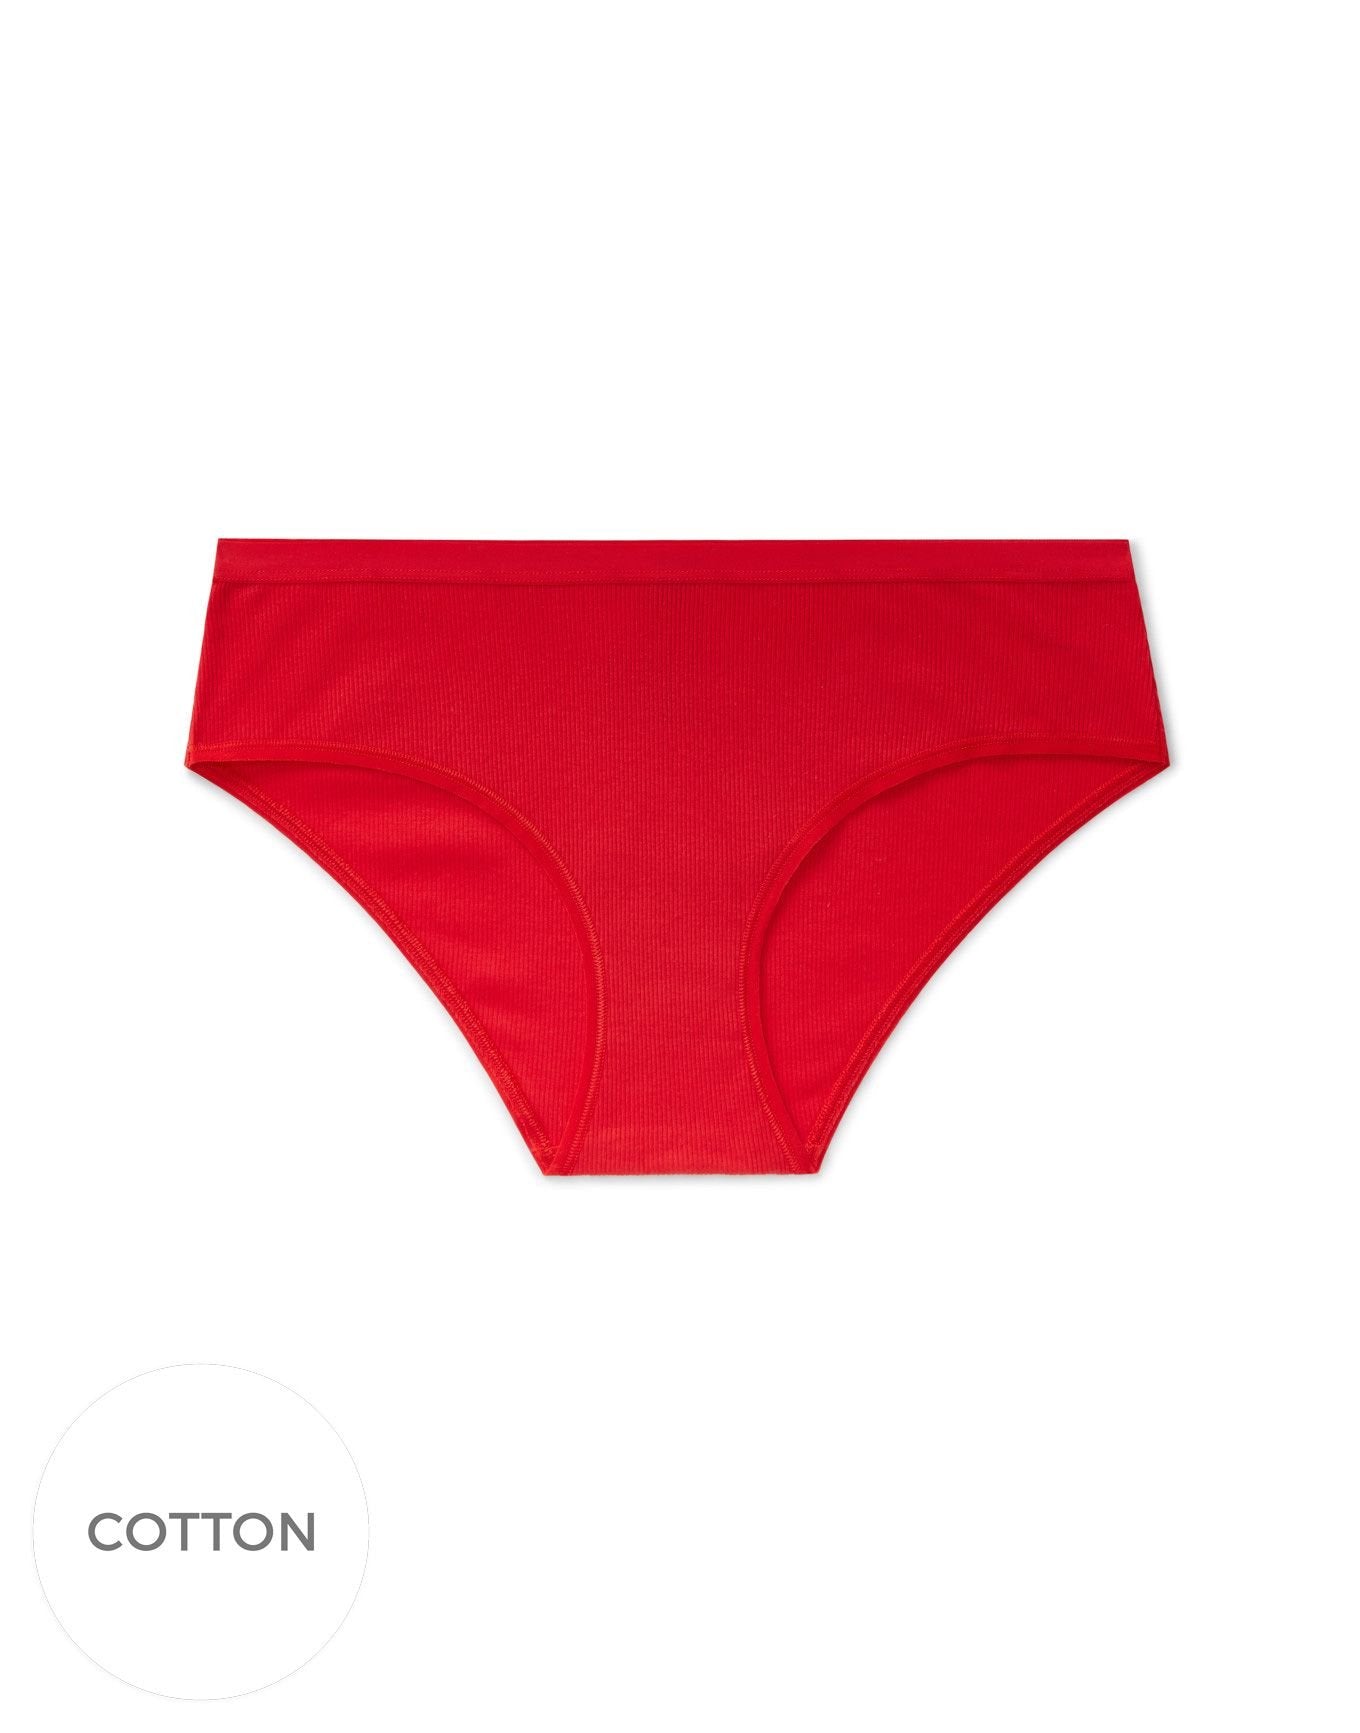 Adore Me Bruna Ribbed Cotton Hipster in color Red Pepper 3ET8 and shape hipster